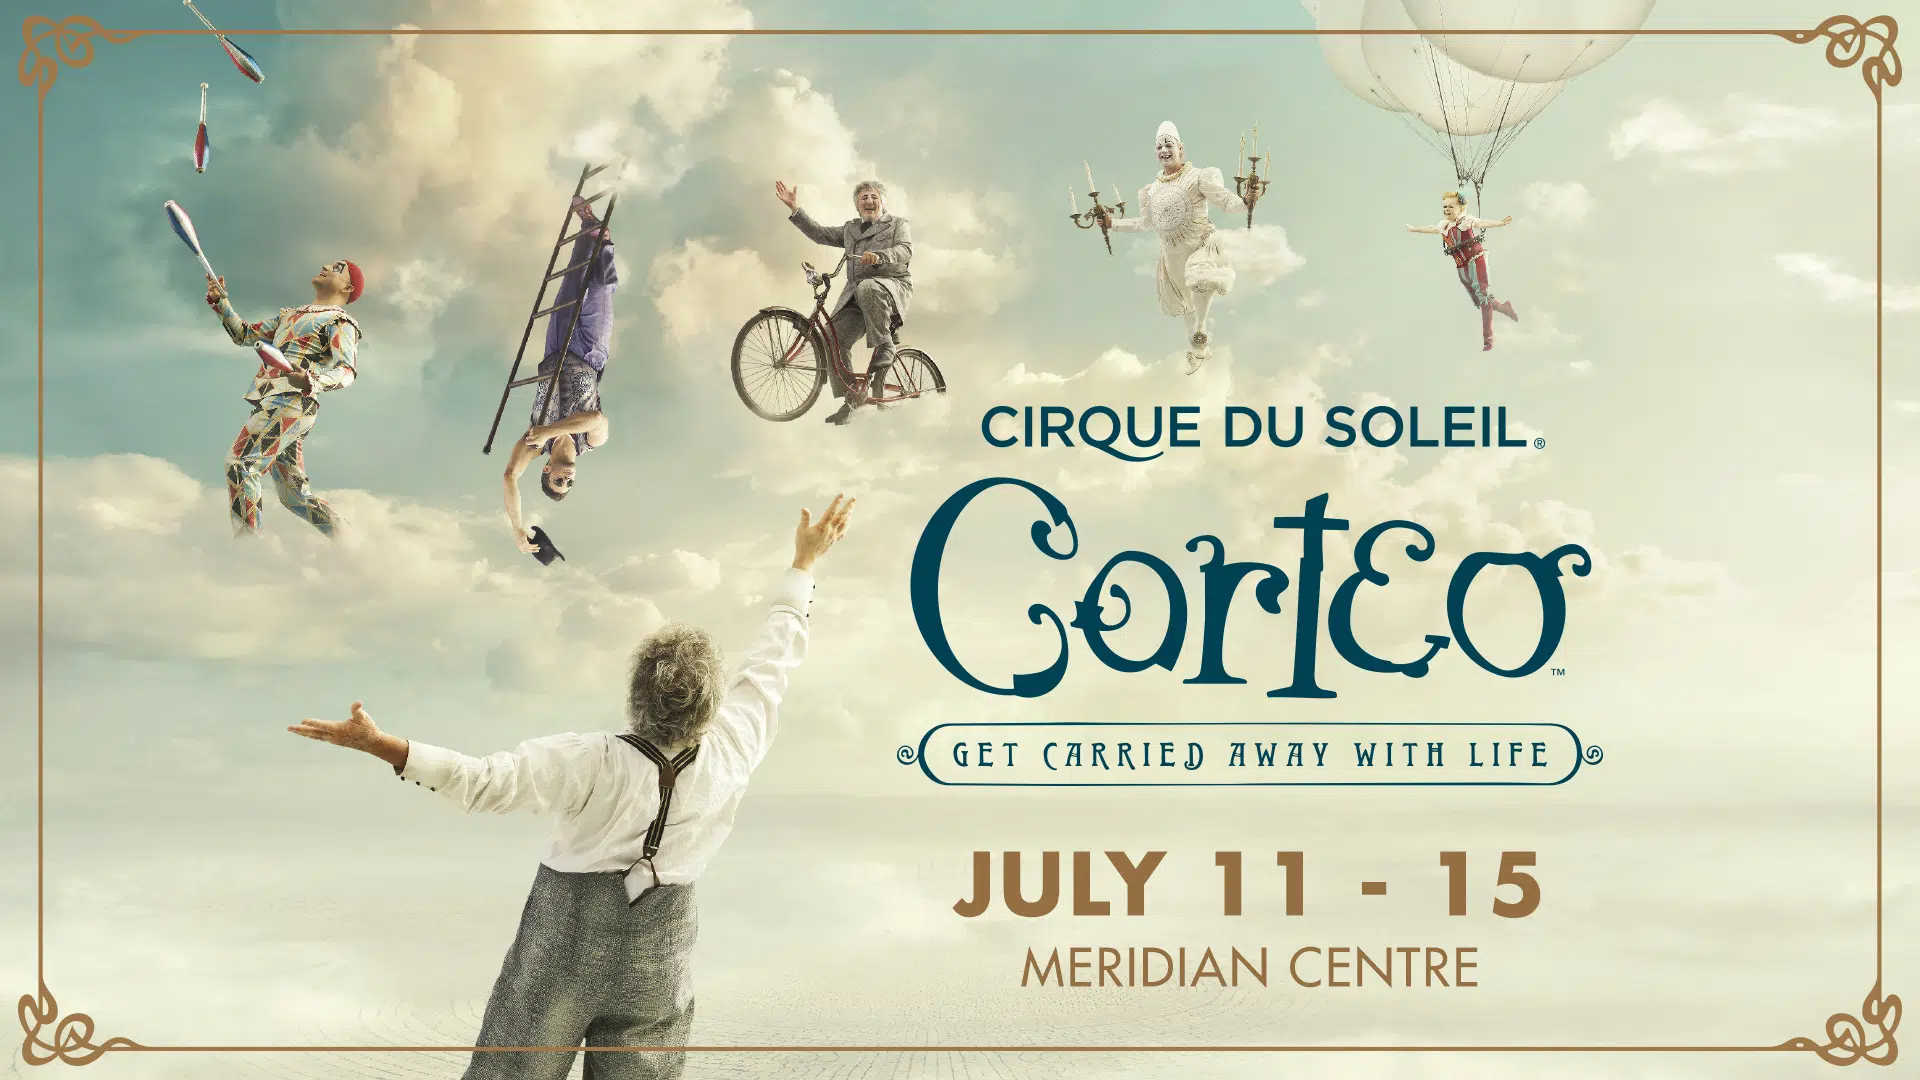 Summersault into Spring with the Cirque du Soleil!